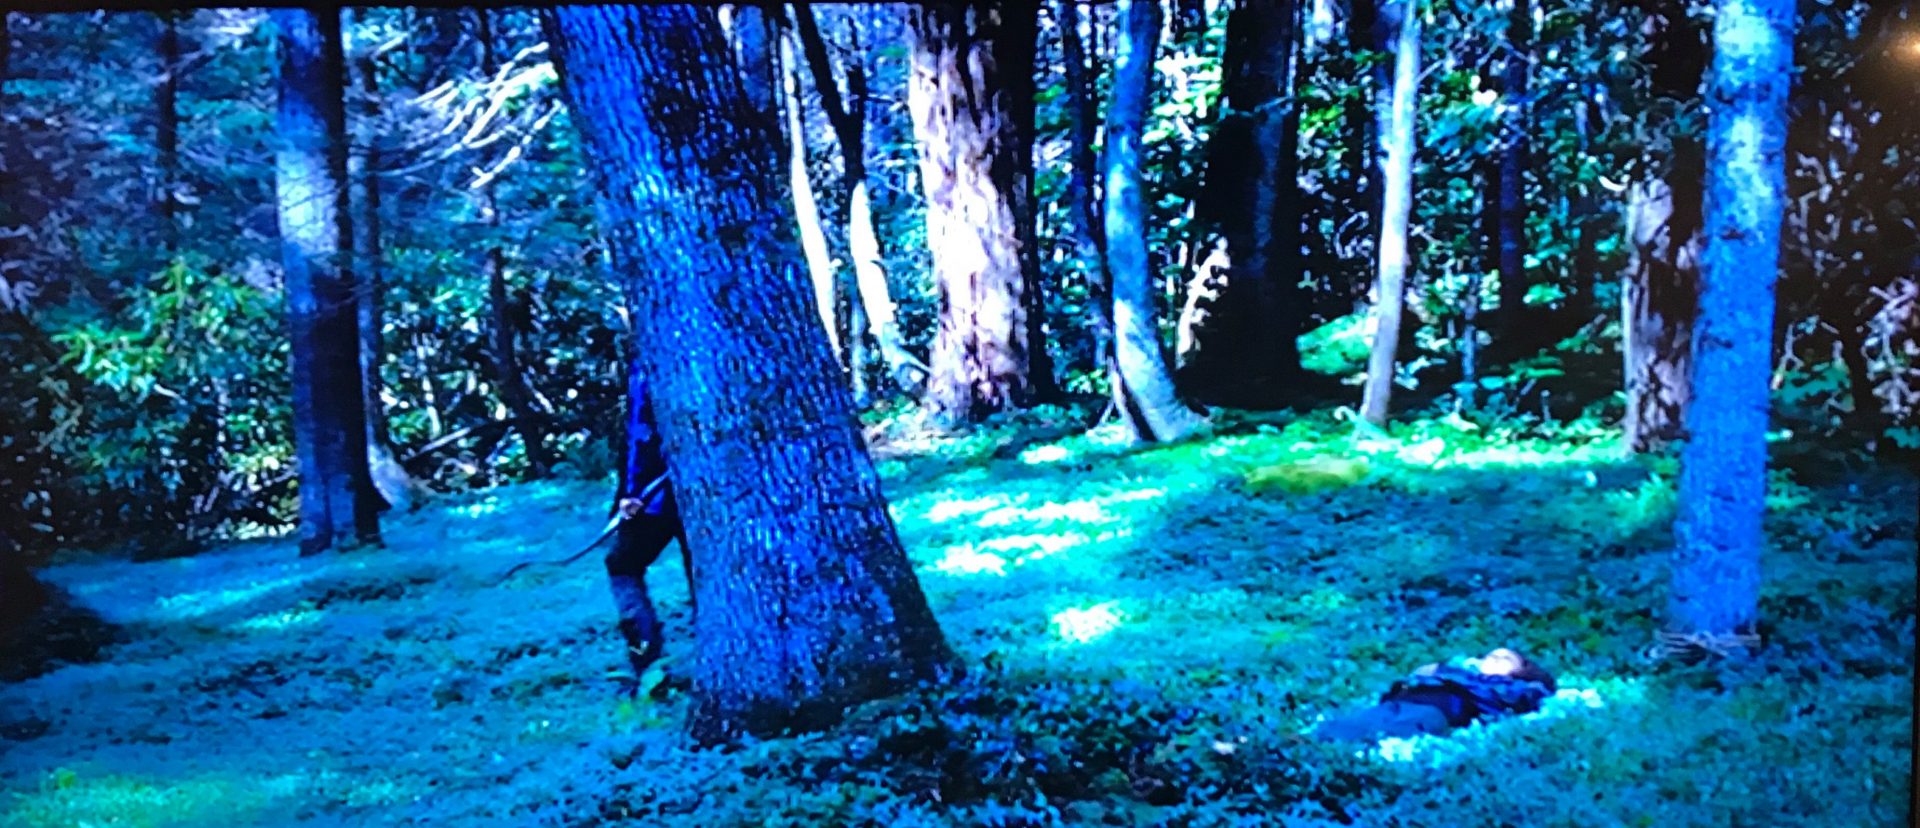 A scene from the Hunger Games where Katniss peers out from behind a tree in a green forest